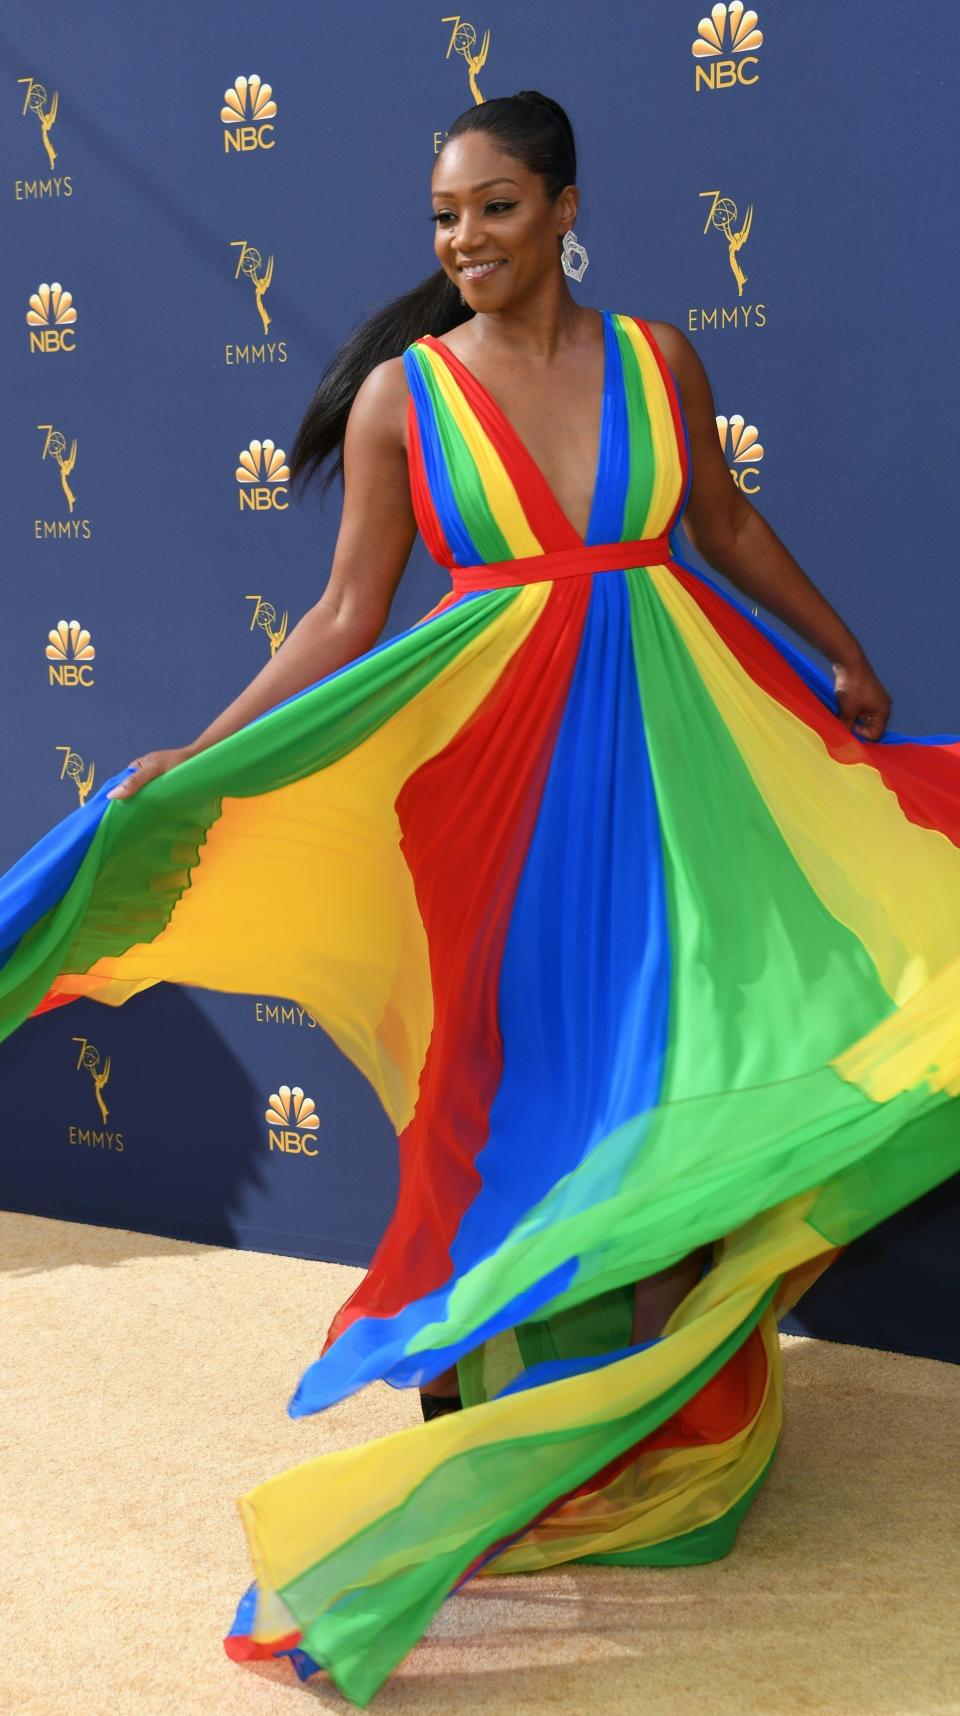 Haddish having a blast on the Emmy red carpet. (Photo: VALERIE MACON / Getty Images)